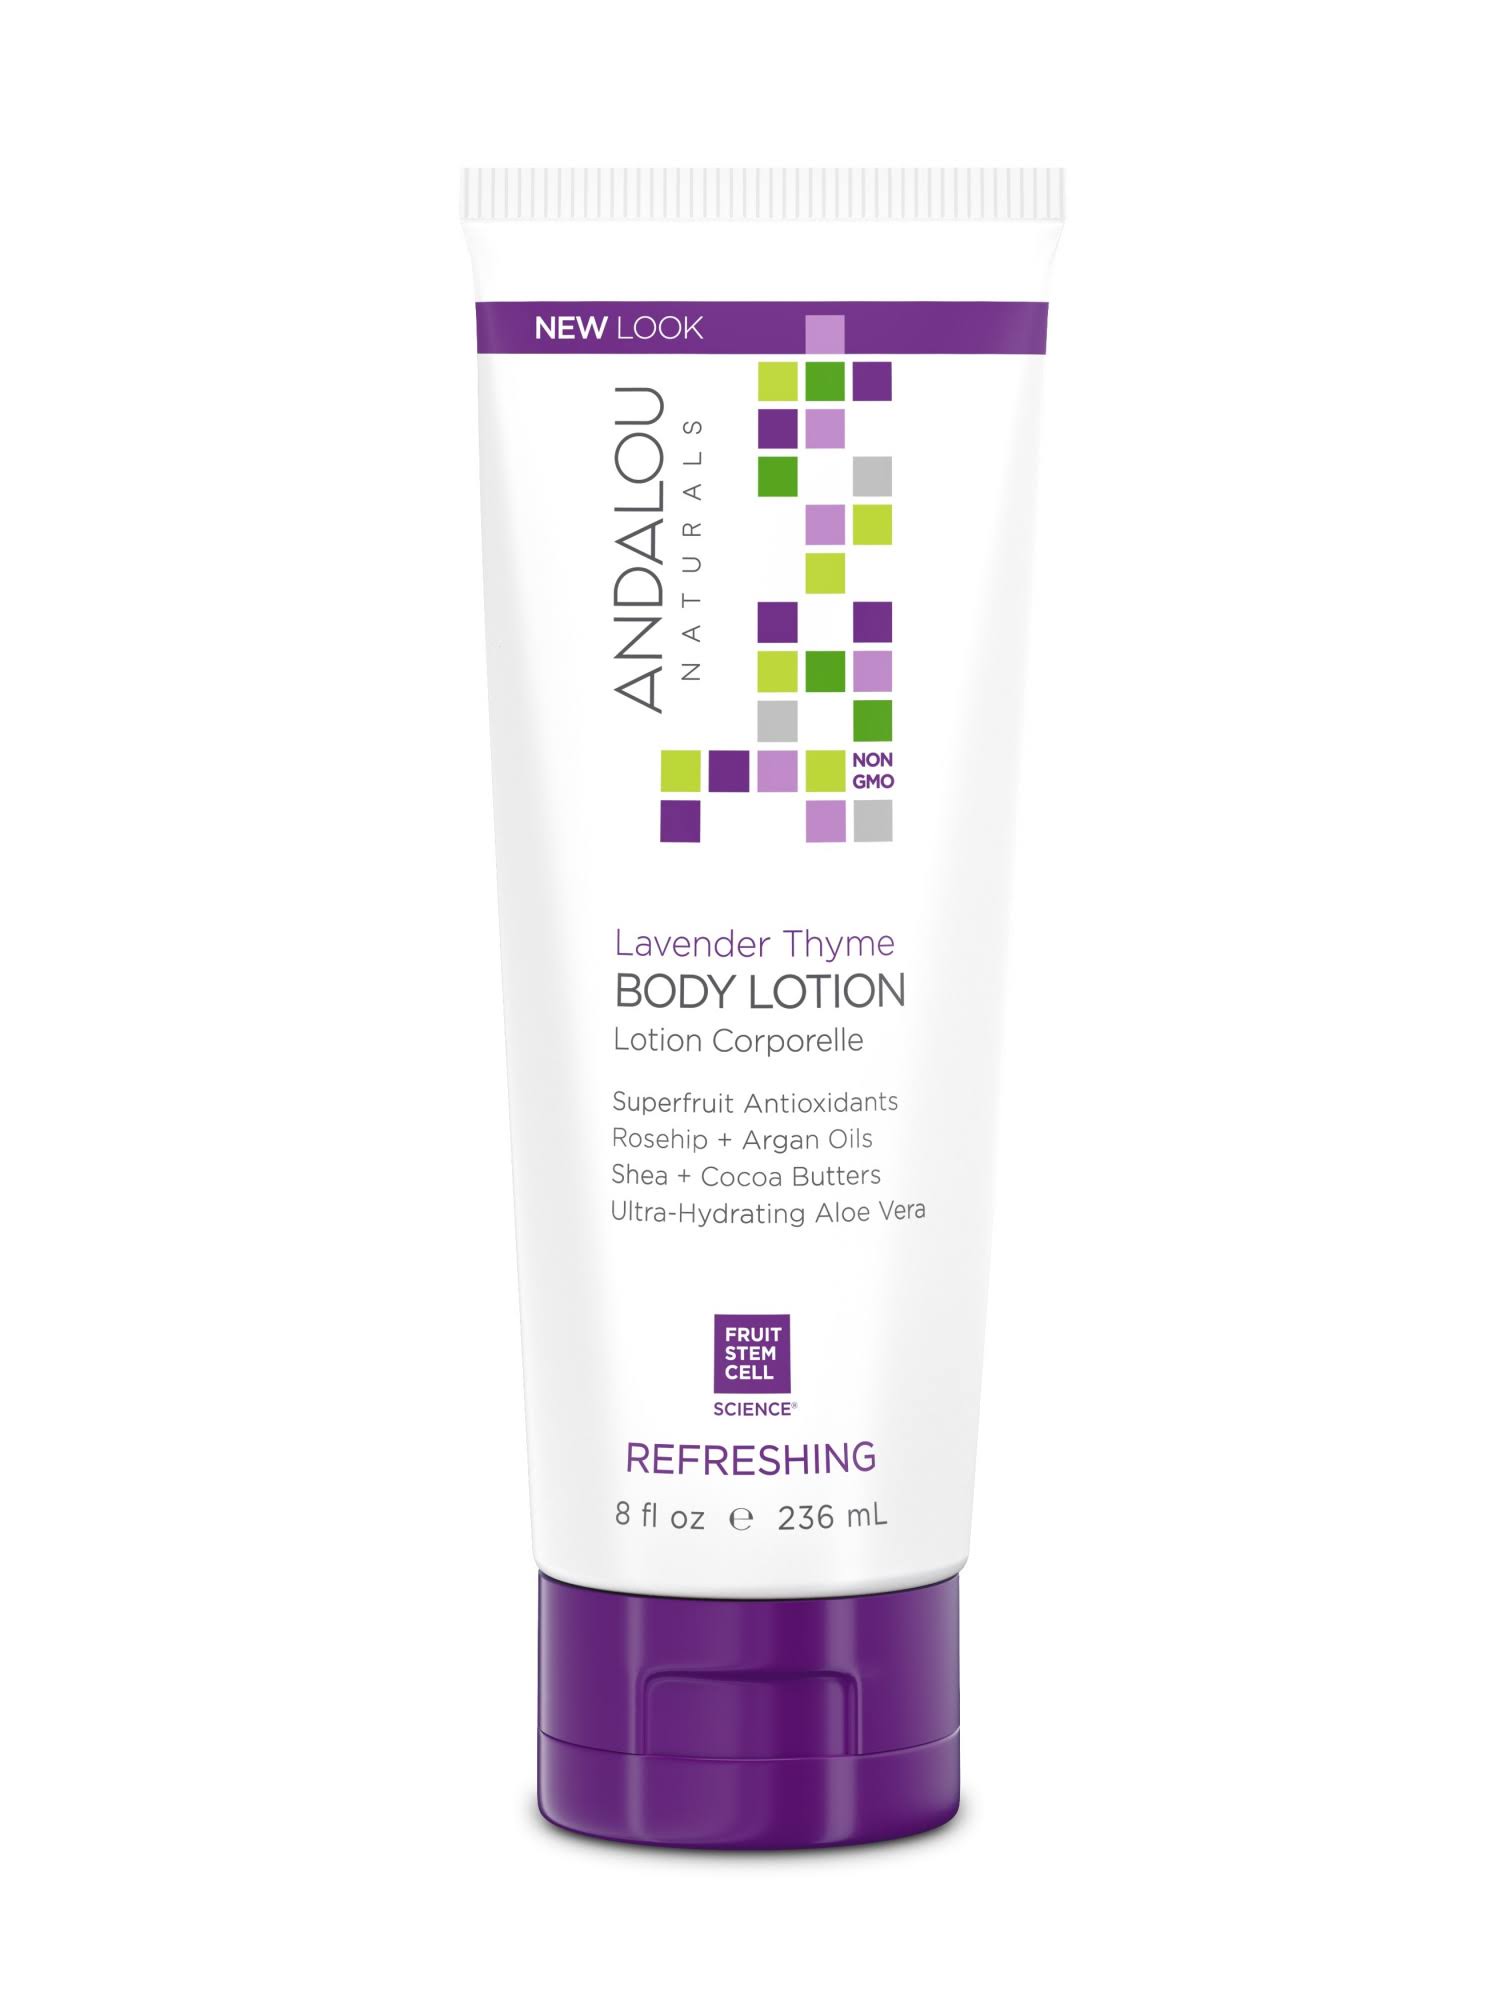 Andalou Naturals Body Lotion - Lavender Thyme